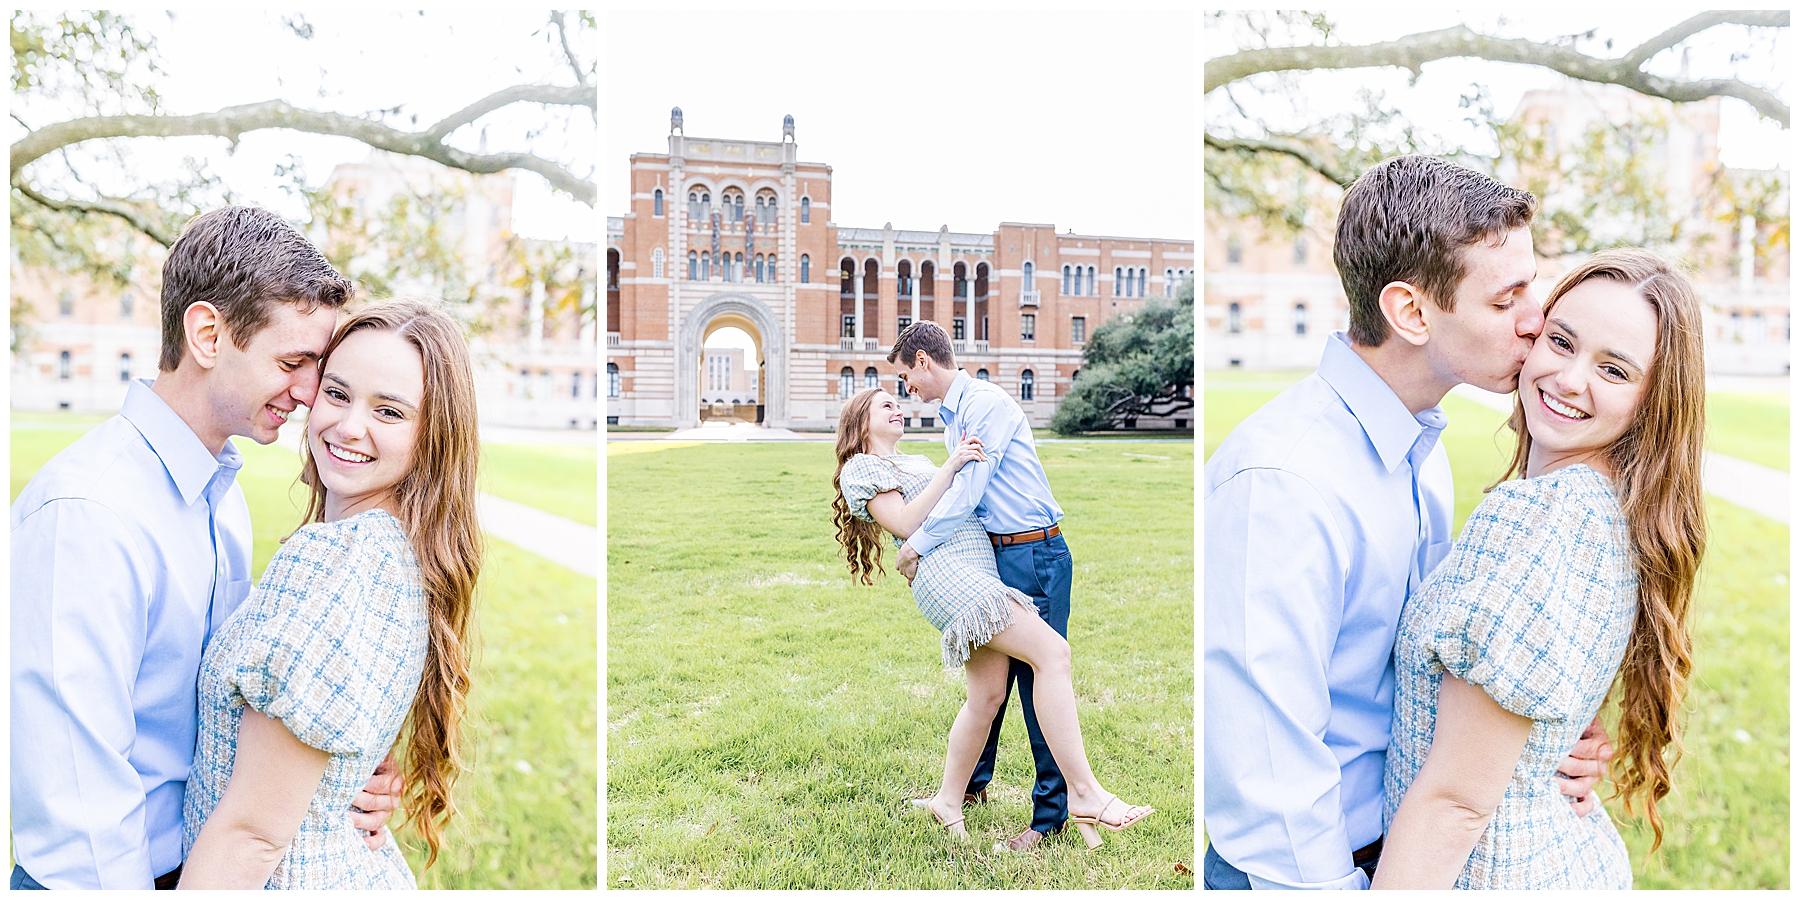 Romantic engagement session in Houston TX at Rice University 